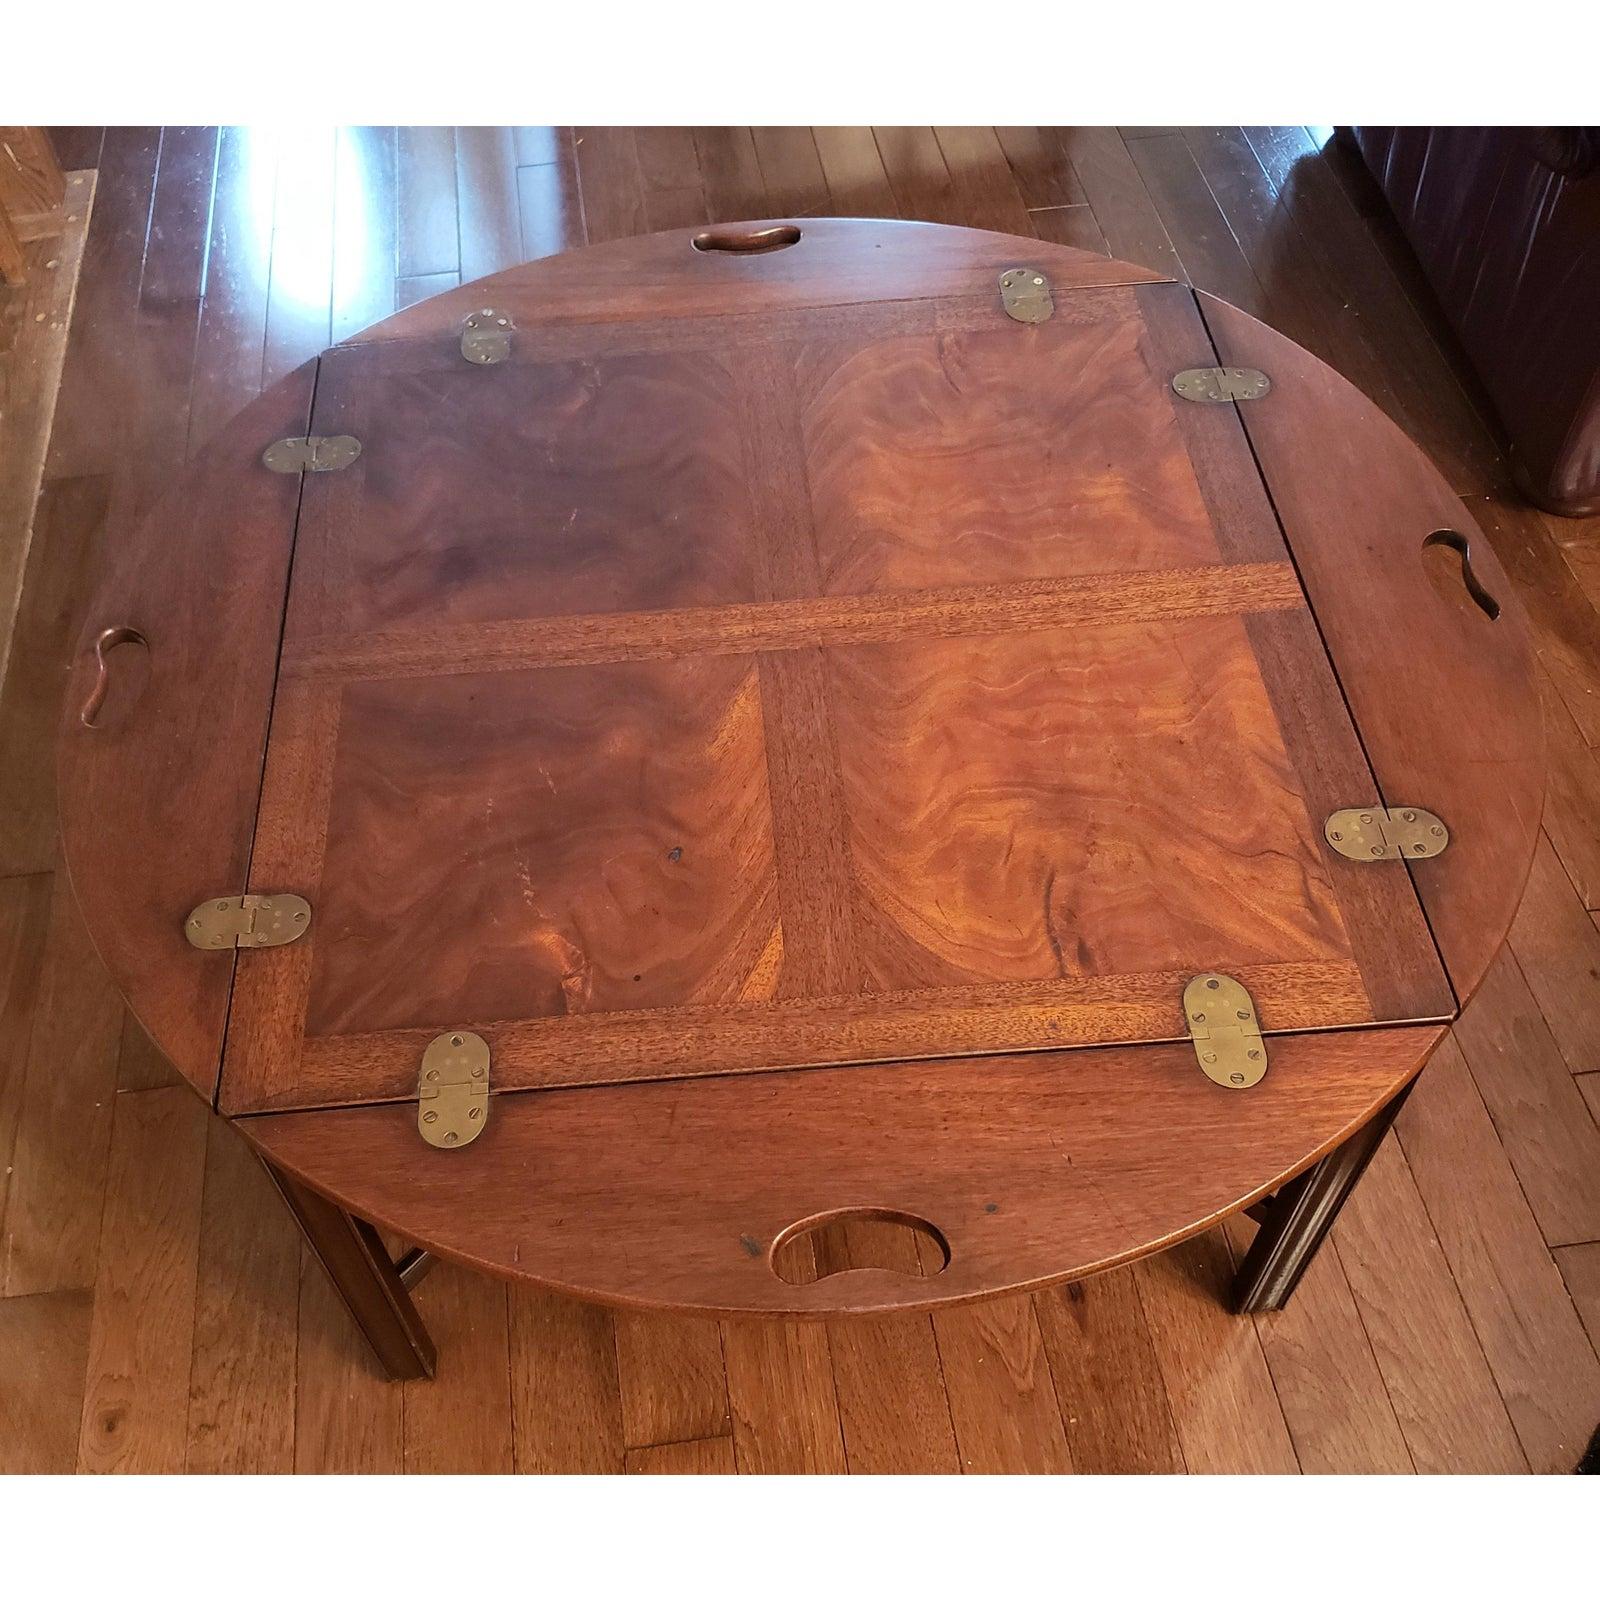 Beautiful classic Heritage Butler's table. Finest quality fixed butler's coffee table in square cut mahogany painstakingly crafted. Fold down arched sides with pierced handles and solid brass hinges. Measurements are 36